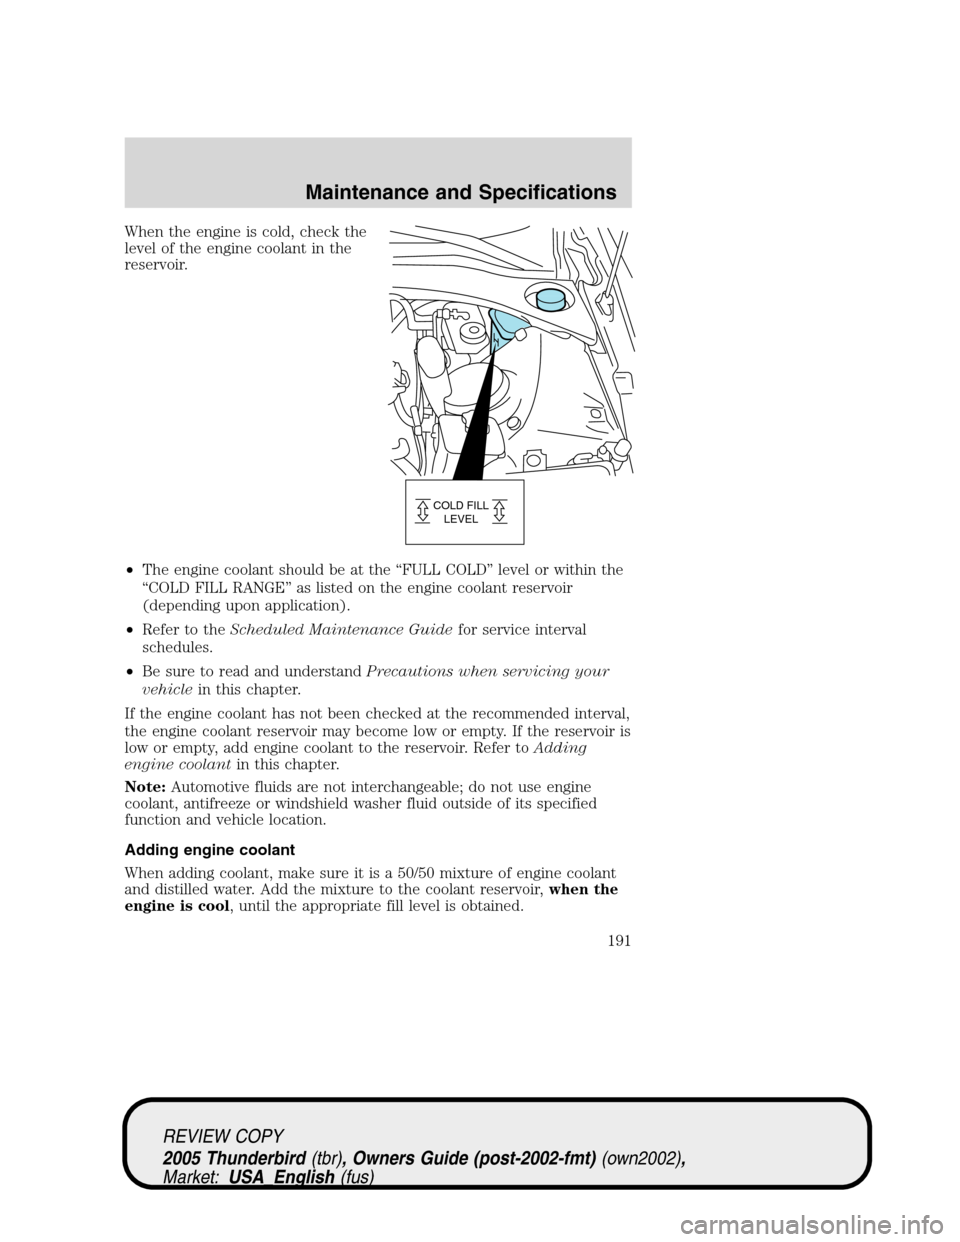 FORD THUNDERBIRD 2005 11.G Owners Manual When the engine is cold, check the
level of the engine coolant in the
reservoir.
•The engine coolant should be at the“FULL COLD”level or within the
“COLD FILL RANGE”as listed on the engine c